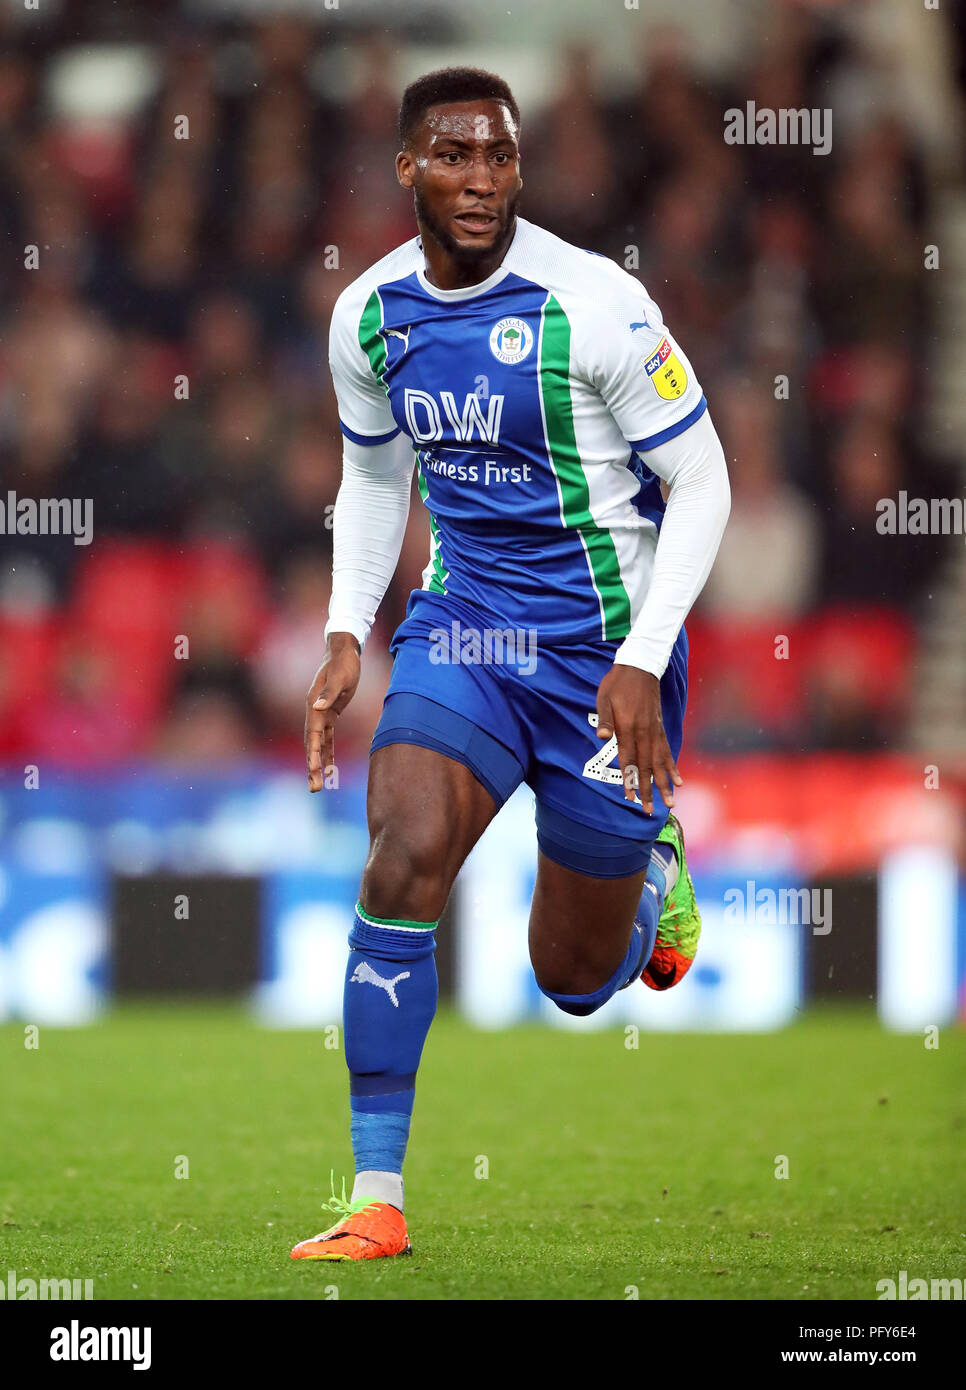 Wigan Athletic's Cheyenne Dunkley during the Sky Bet Championship match at the bet365 Stadium, Stoke. PRESS ASSOCIATION Photo. Picture date: Wednesday August 22, 2018. See PA story SOCCER Stoke. Photo credit should read: Nick Potts/PA Wire. RESTRICTIONS: No use with unauthorised audio, video, data, fixture lists, club/league logos or 'live' services. Online in-match use limited to 120 images, no video emulation. No use in betting, games or single club/league/player publications. Stock Photo